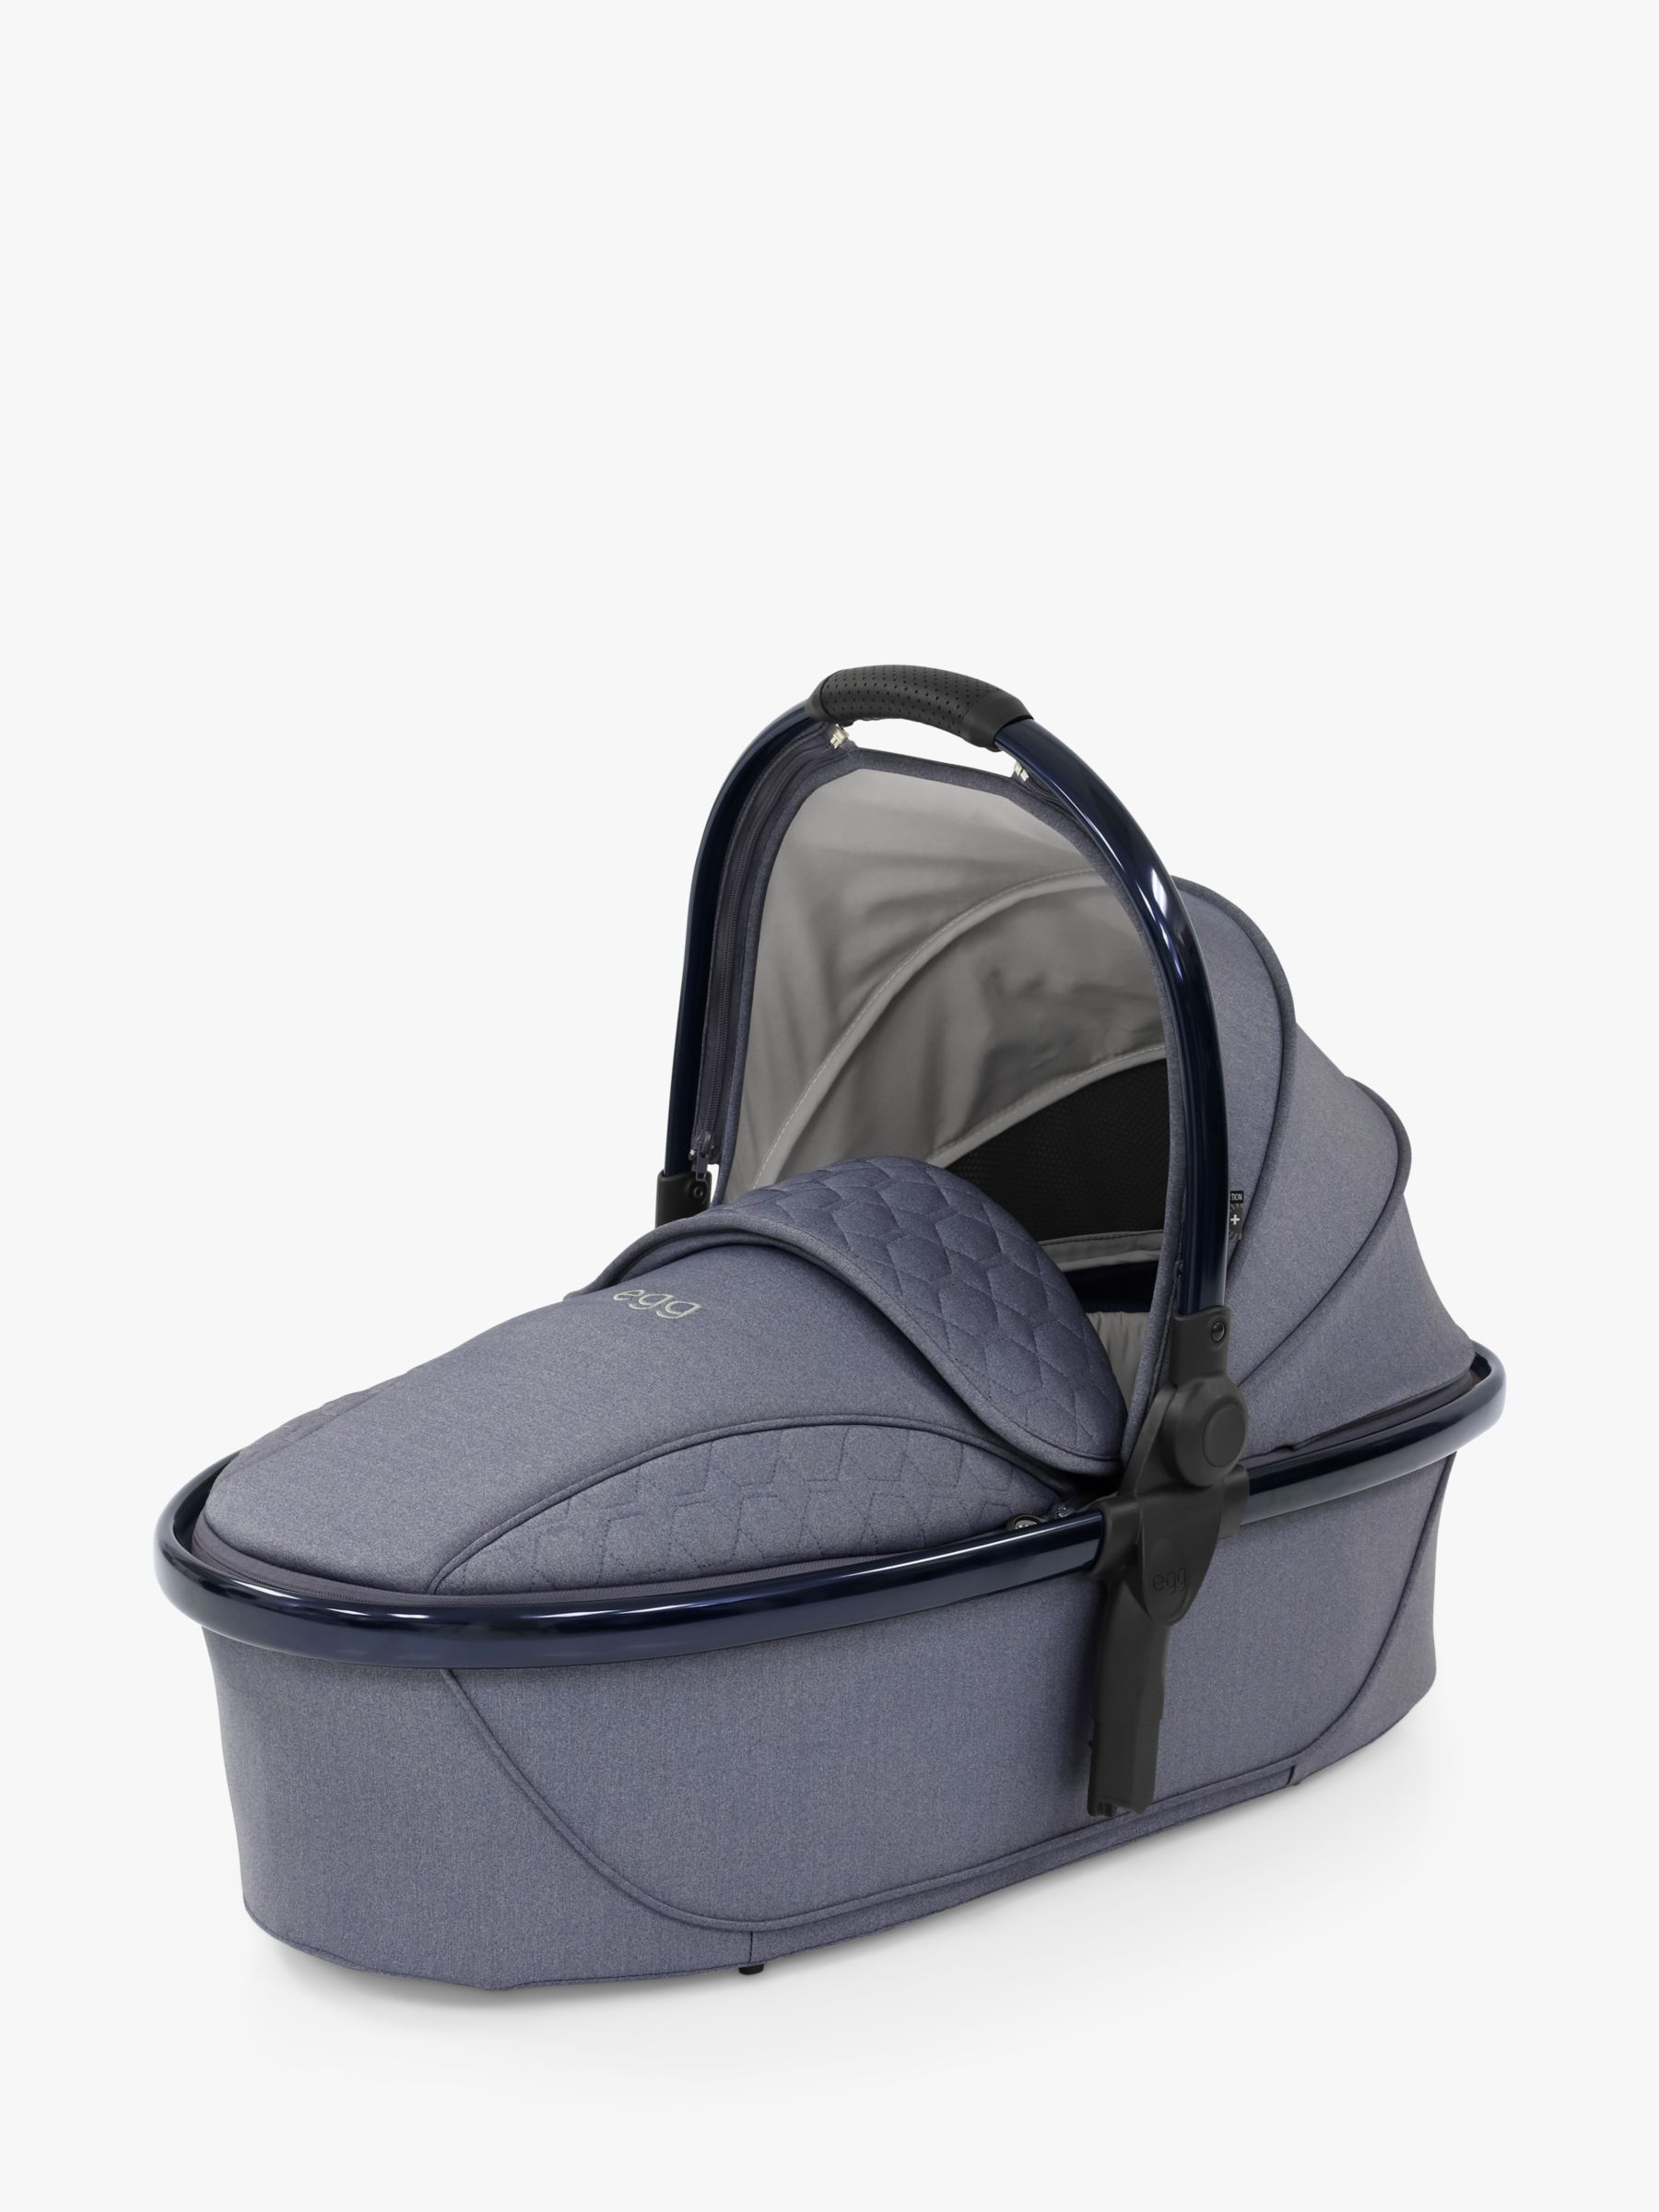 egg2 Carrycot